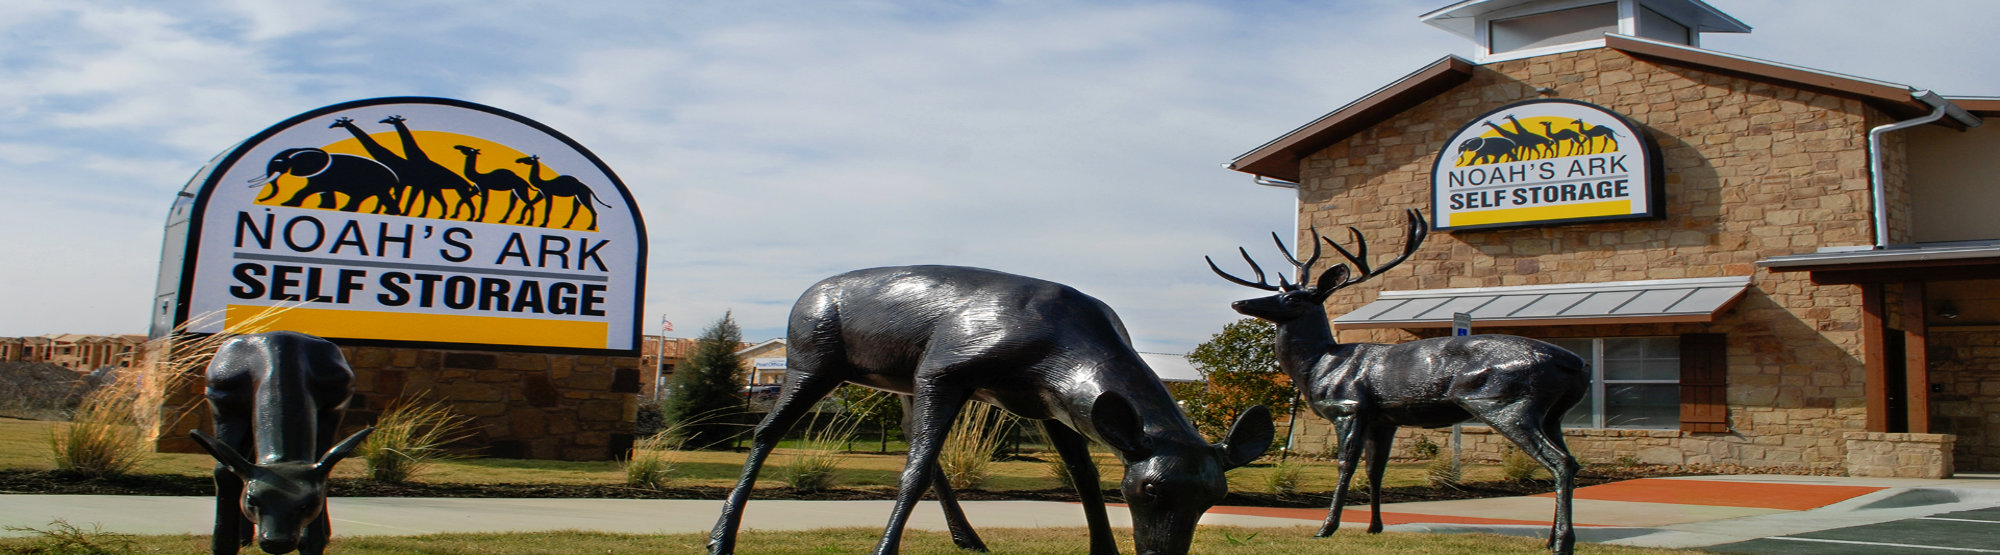 front sign and entrance to noah's ark self storage. metal deer statues out front